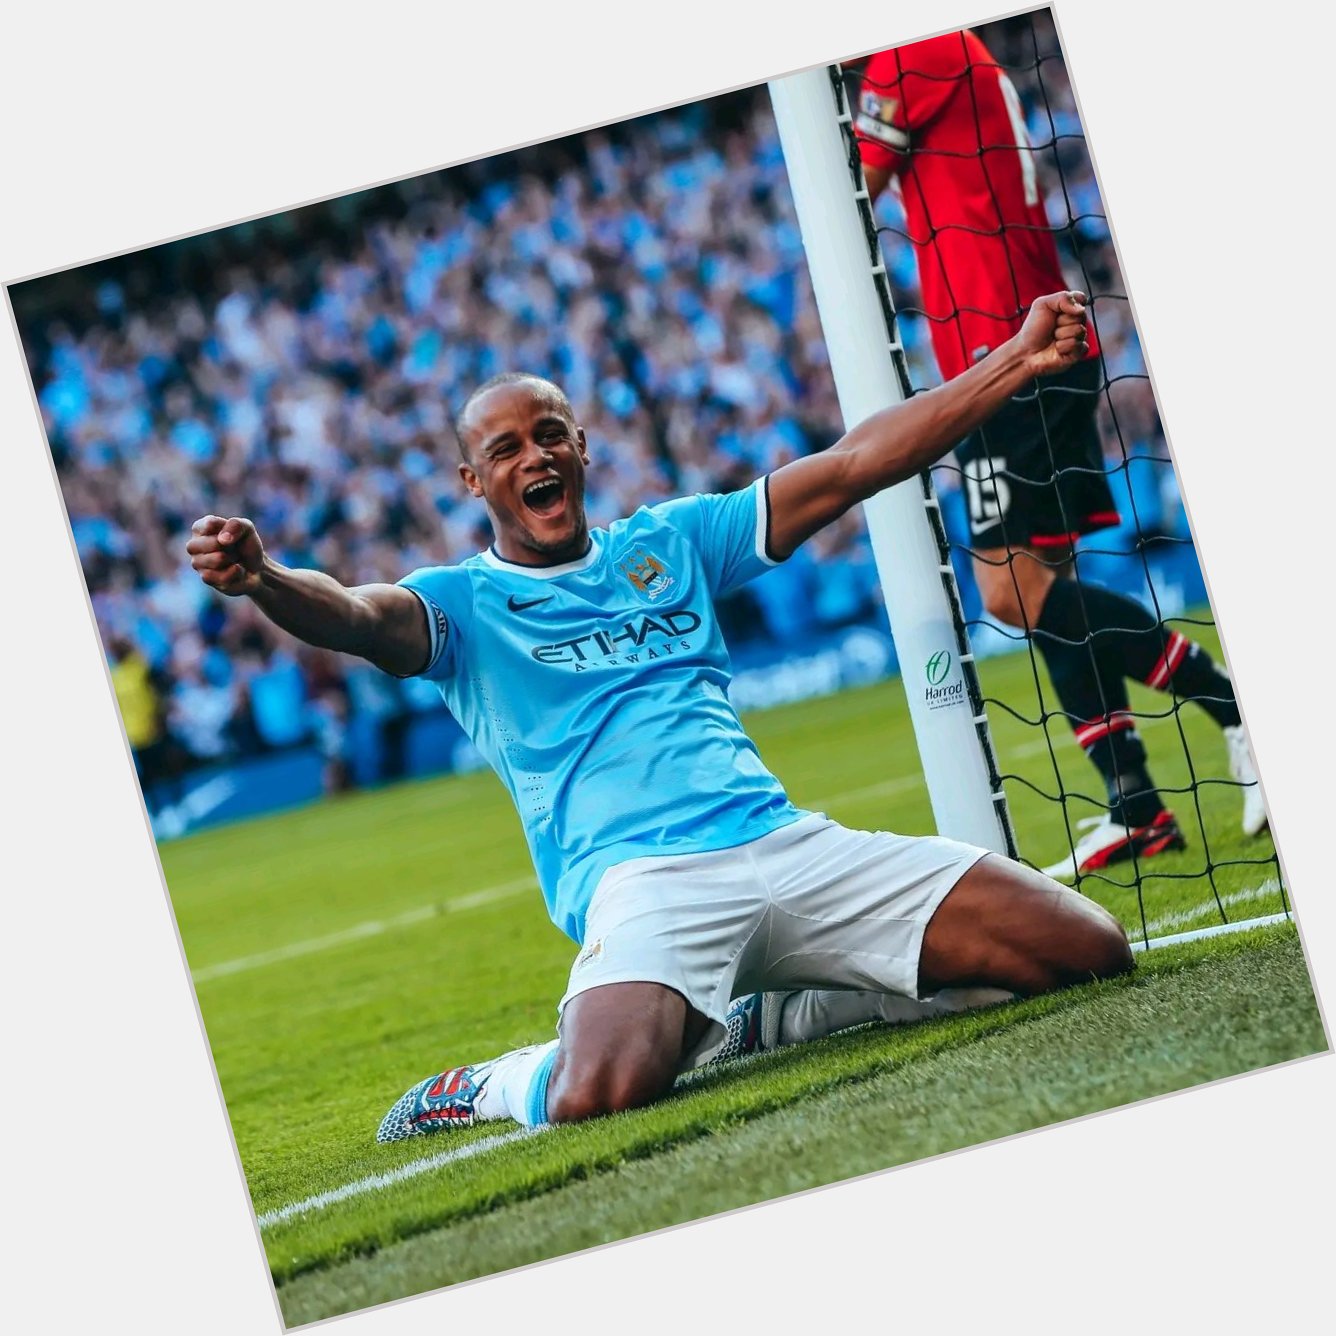 Wishing a very Happy Birthday to the legend, Vincent Kompany! 